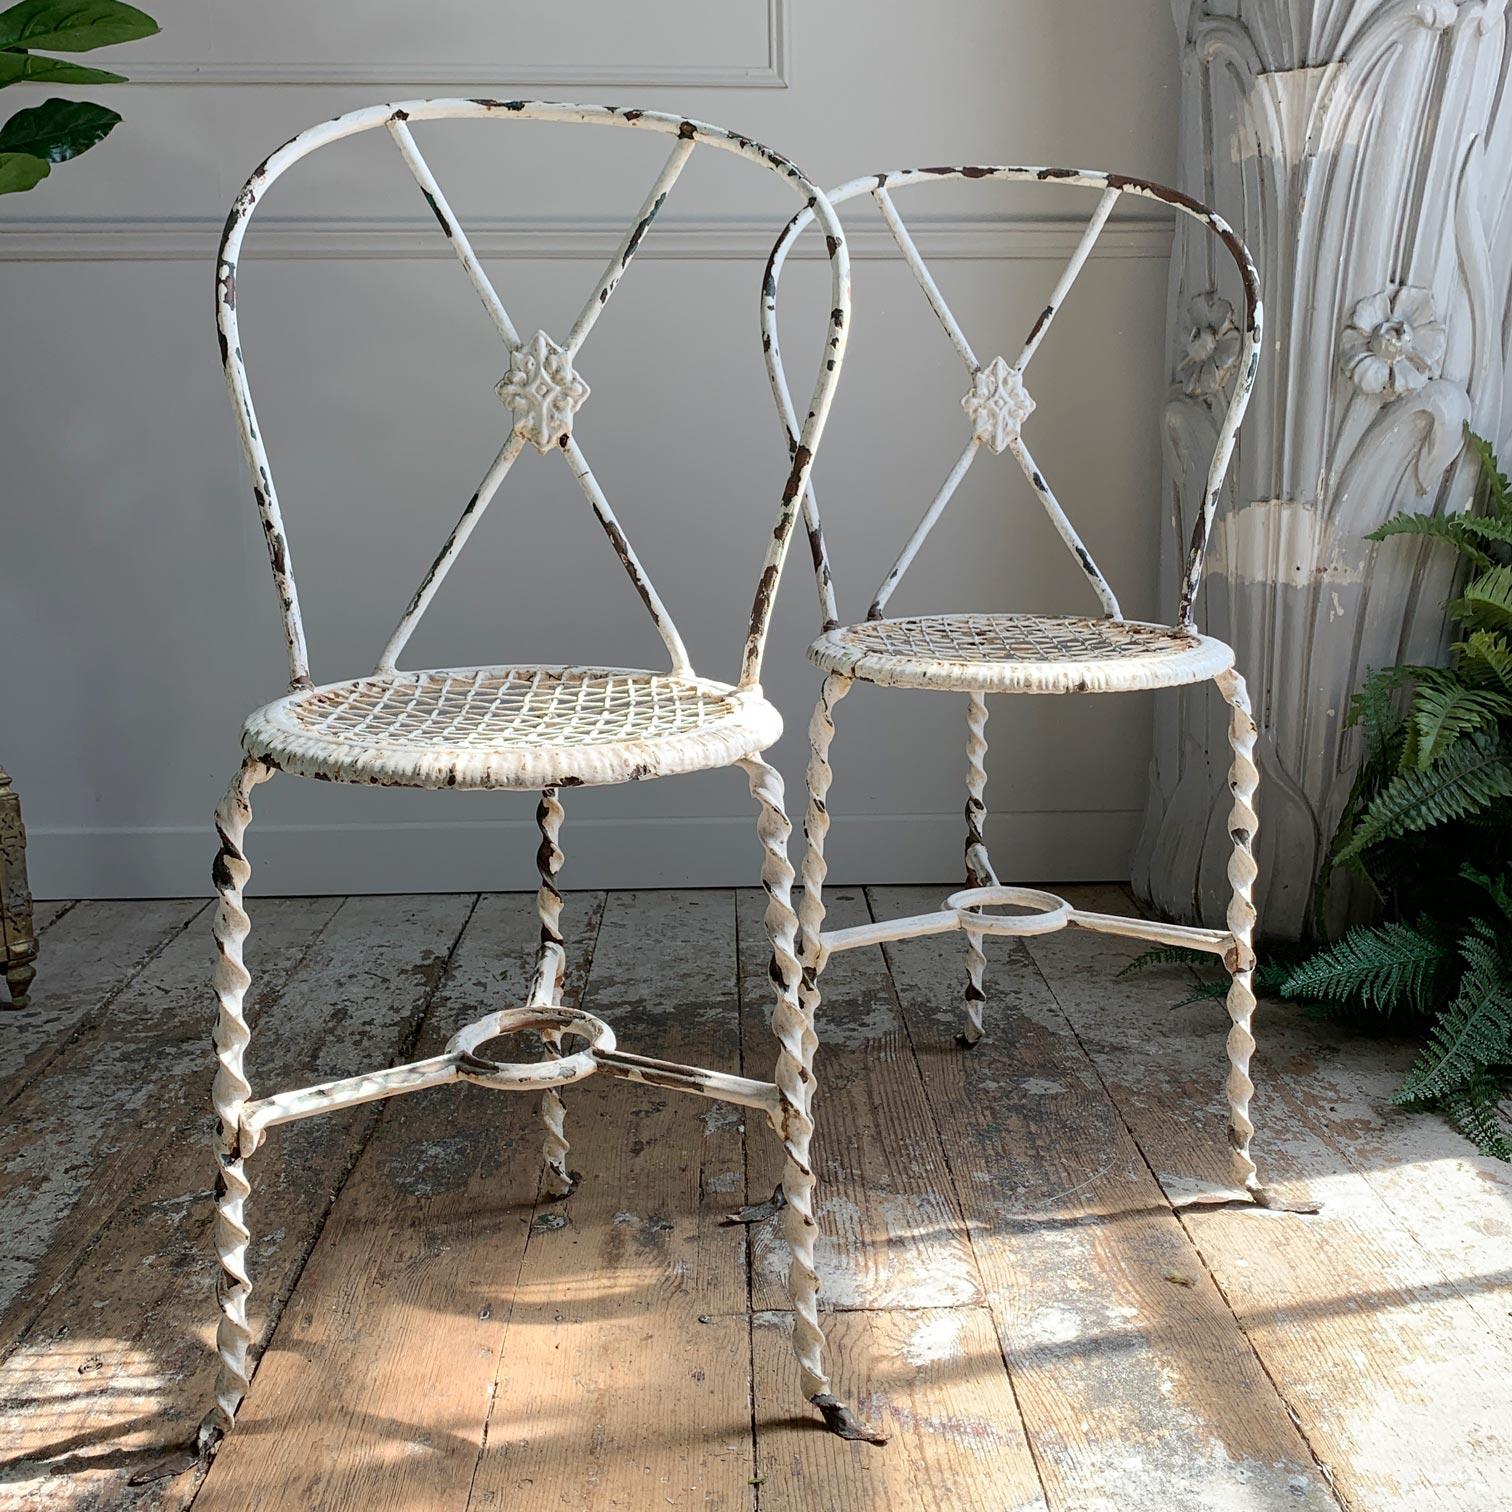 An exquisite pair of early 19th century regency chairs, twisted wrought iron construction, with wirework seats. Each chair is of three legged construction with ‘sparrow’ feet, a highly rare pair of beautiful Regency era chairs, perfect for either